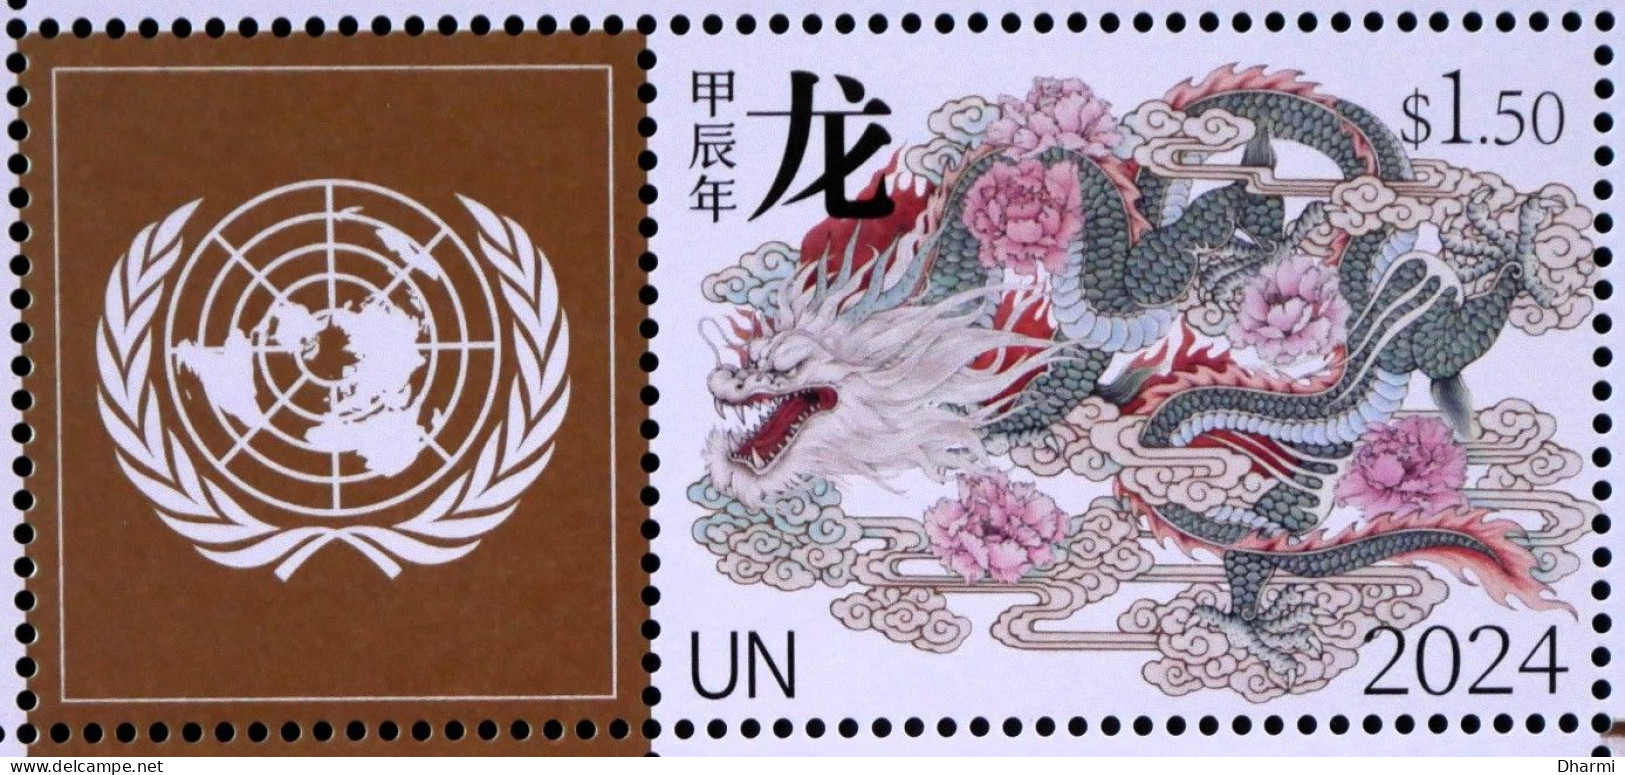 ONU - UNITED NATIONS 2024 - NATIONS UNIES - NEUF** 1TG - LUNAR YEAR OF THE DRAGON - ANNEE LUNAIRE DU DRAGON - MNH - Nuovi